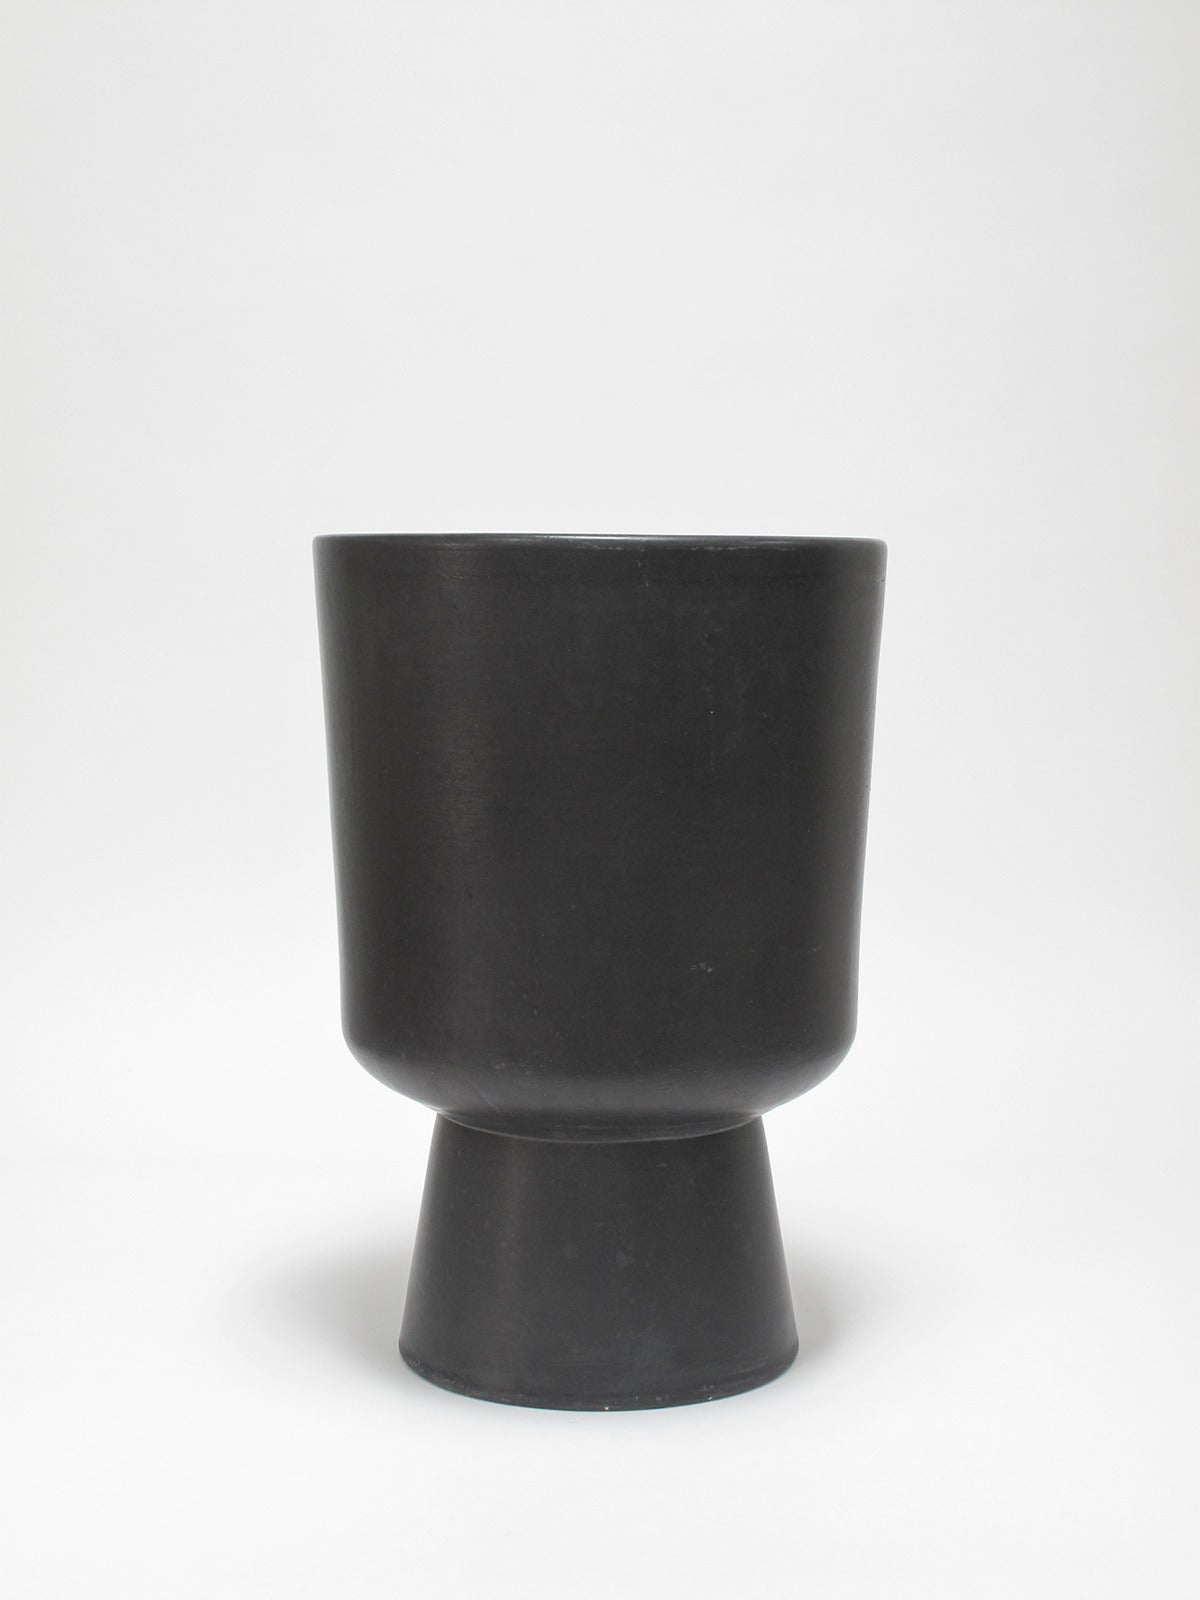 Collection of vintage AP vessels in three storied designs

L-20 planter in black glaze by Malcolm Leland
CP-13 in ochre glaze by John Follis
M-1 planter in white glaze by Paul McCobb
Architectural Pottery, Los Angeles
California Modern,